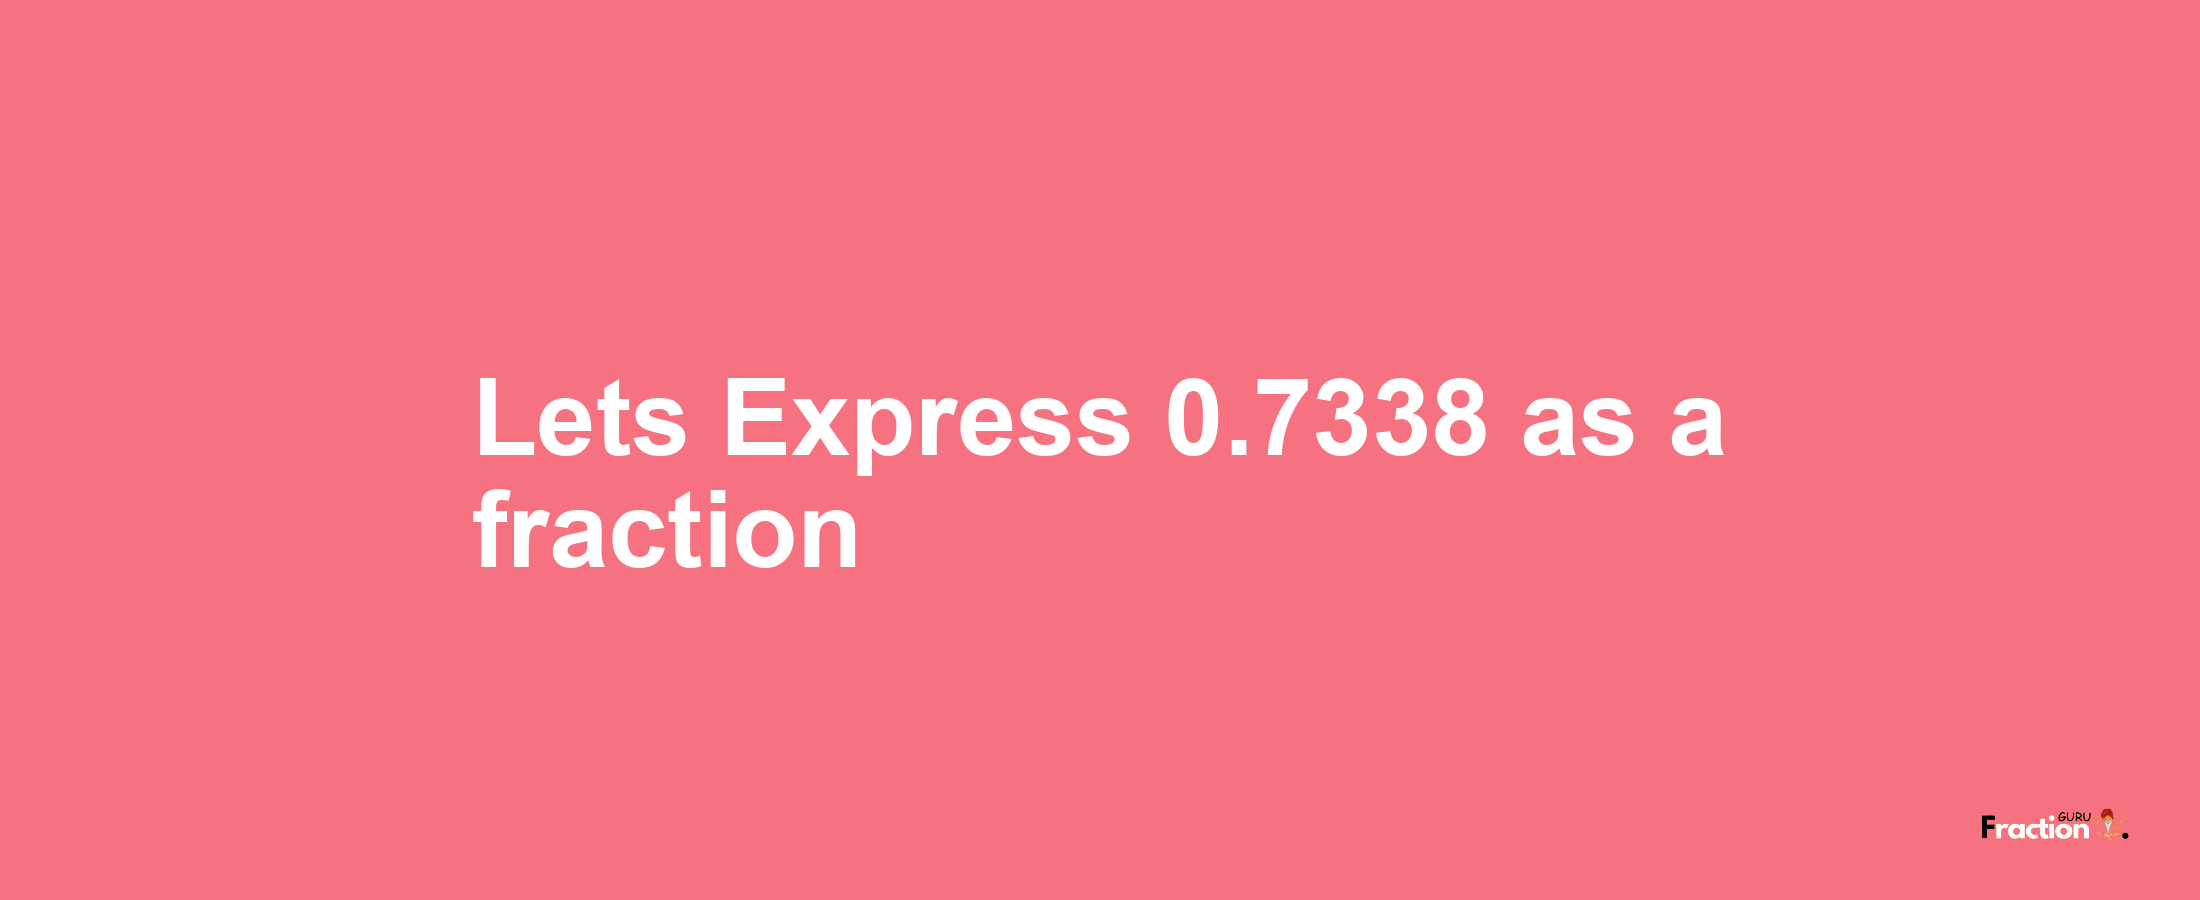 Lets Express 0.7338 as afraction